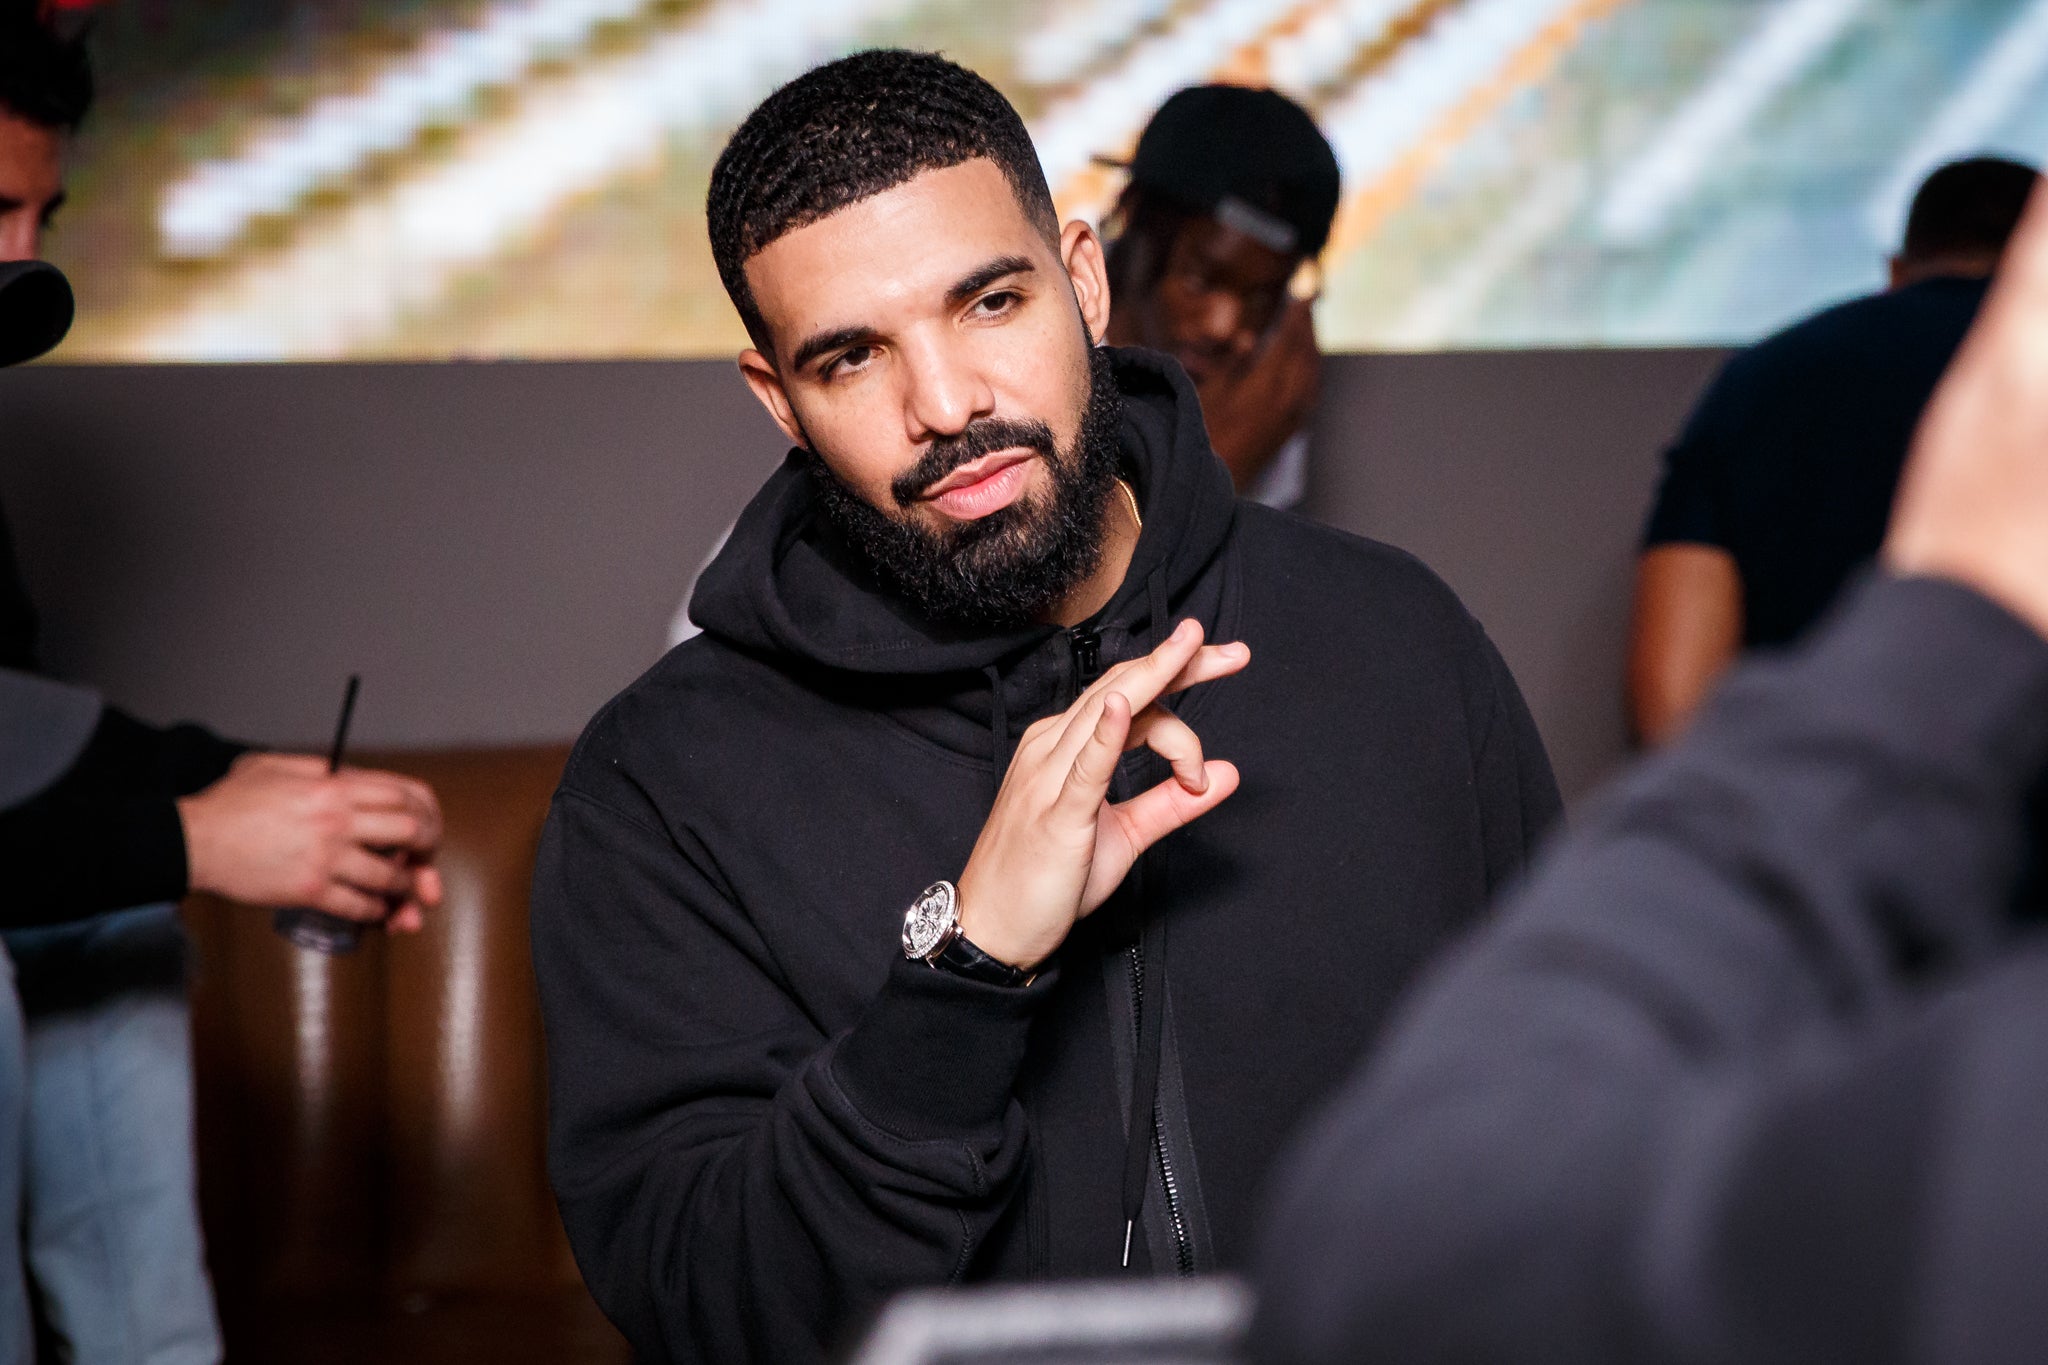 Local athletes joined Drake for a splashy after-party at a Boston nightclub